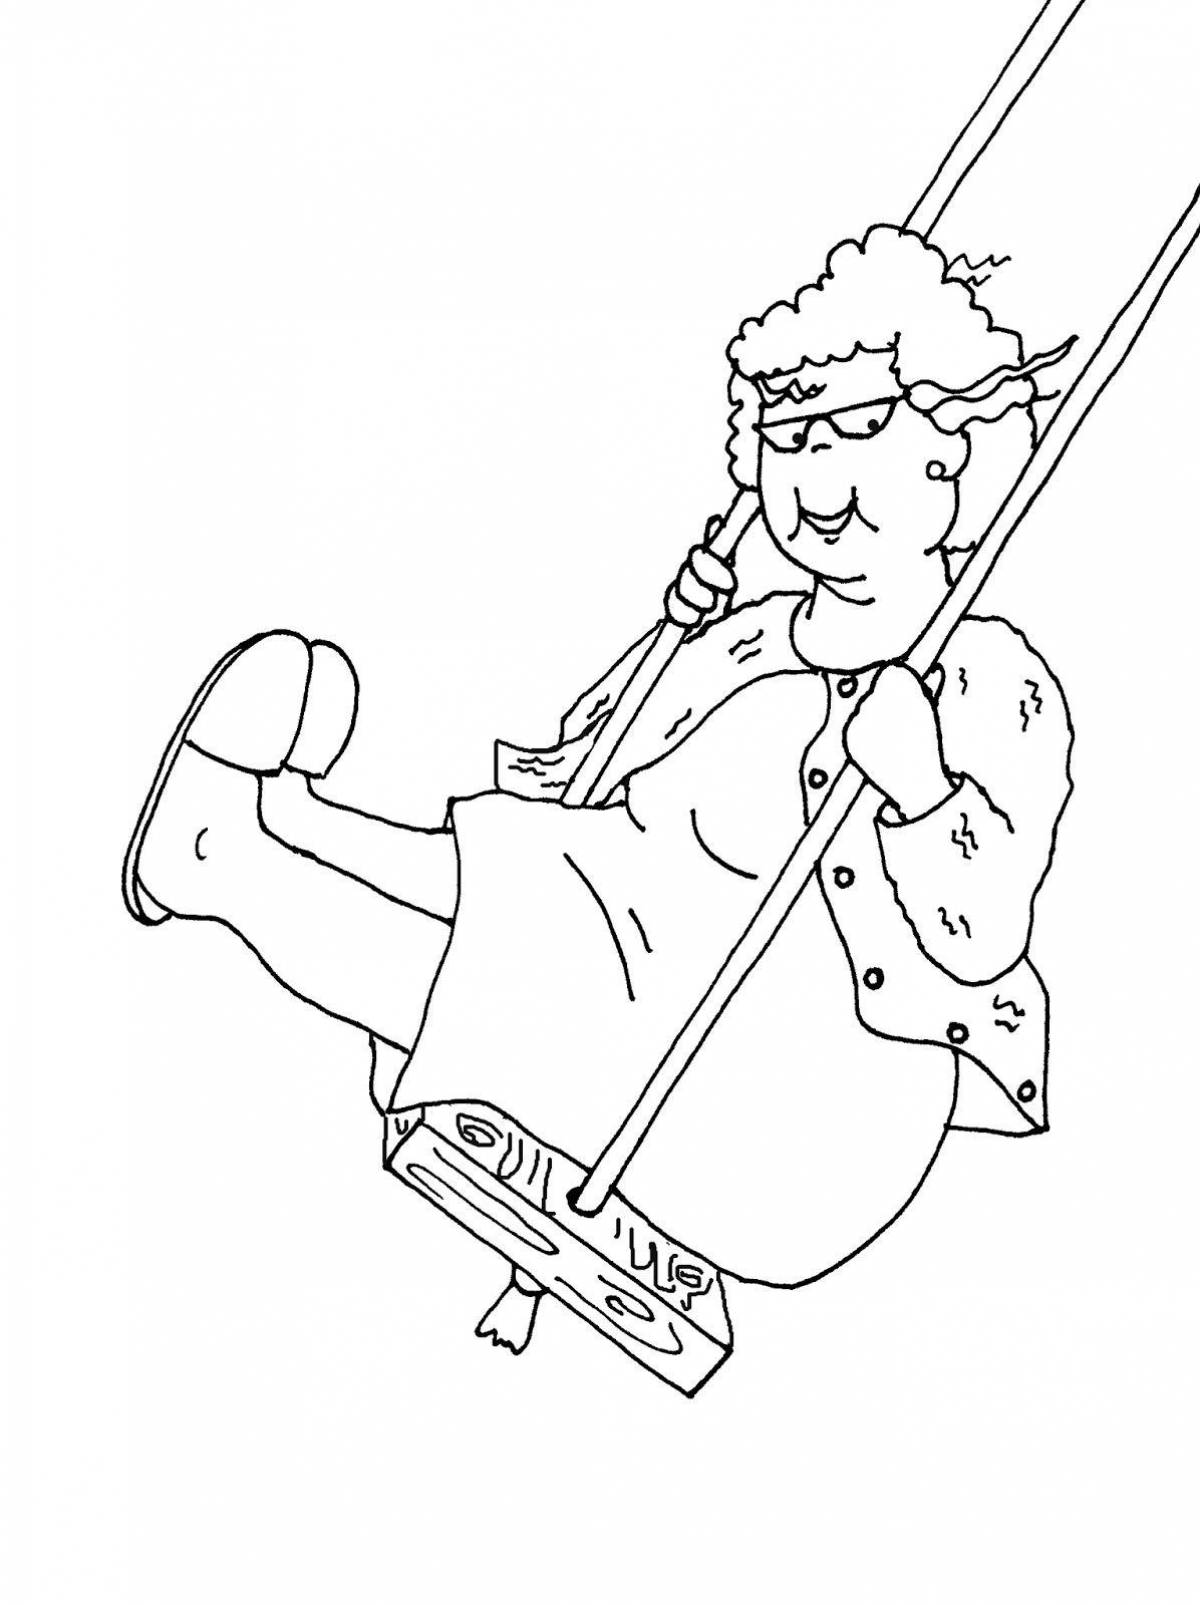 Animated grandmothers coloring page